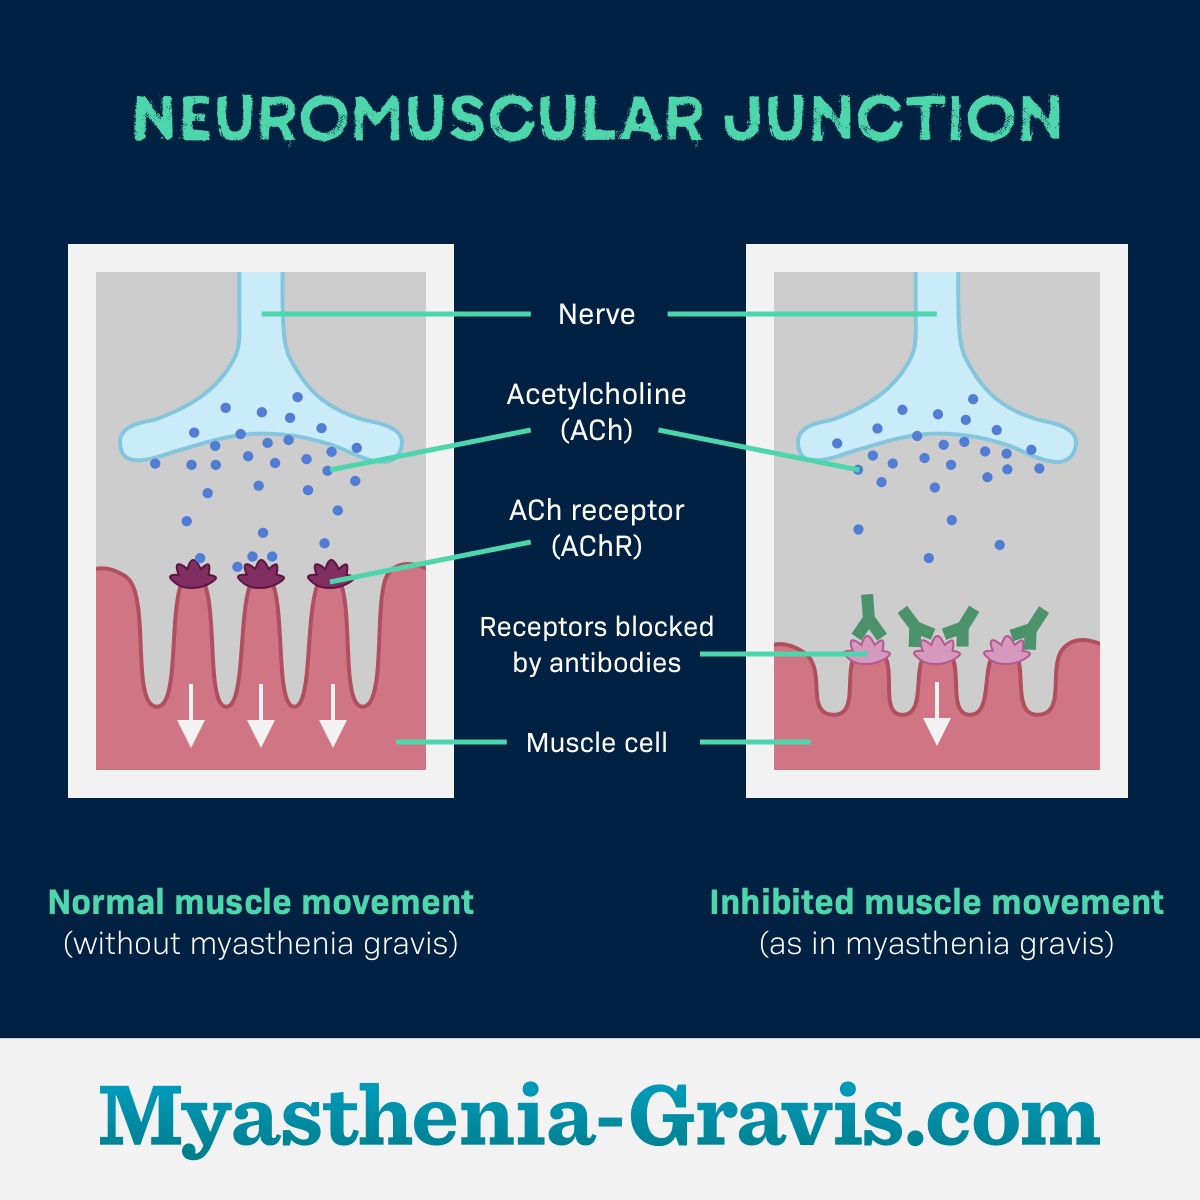 Diagram of a neuromuscular junction with and without myasthenia gravis.